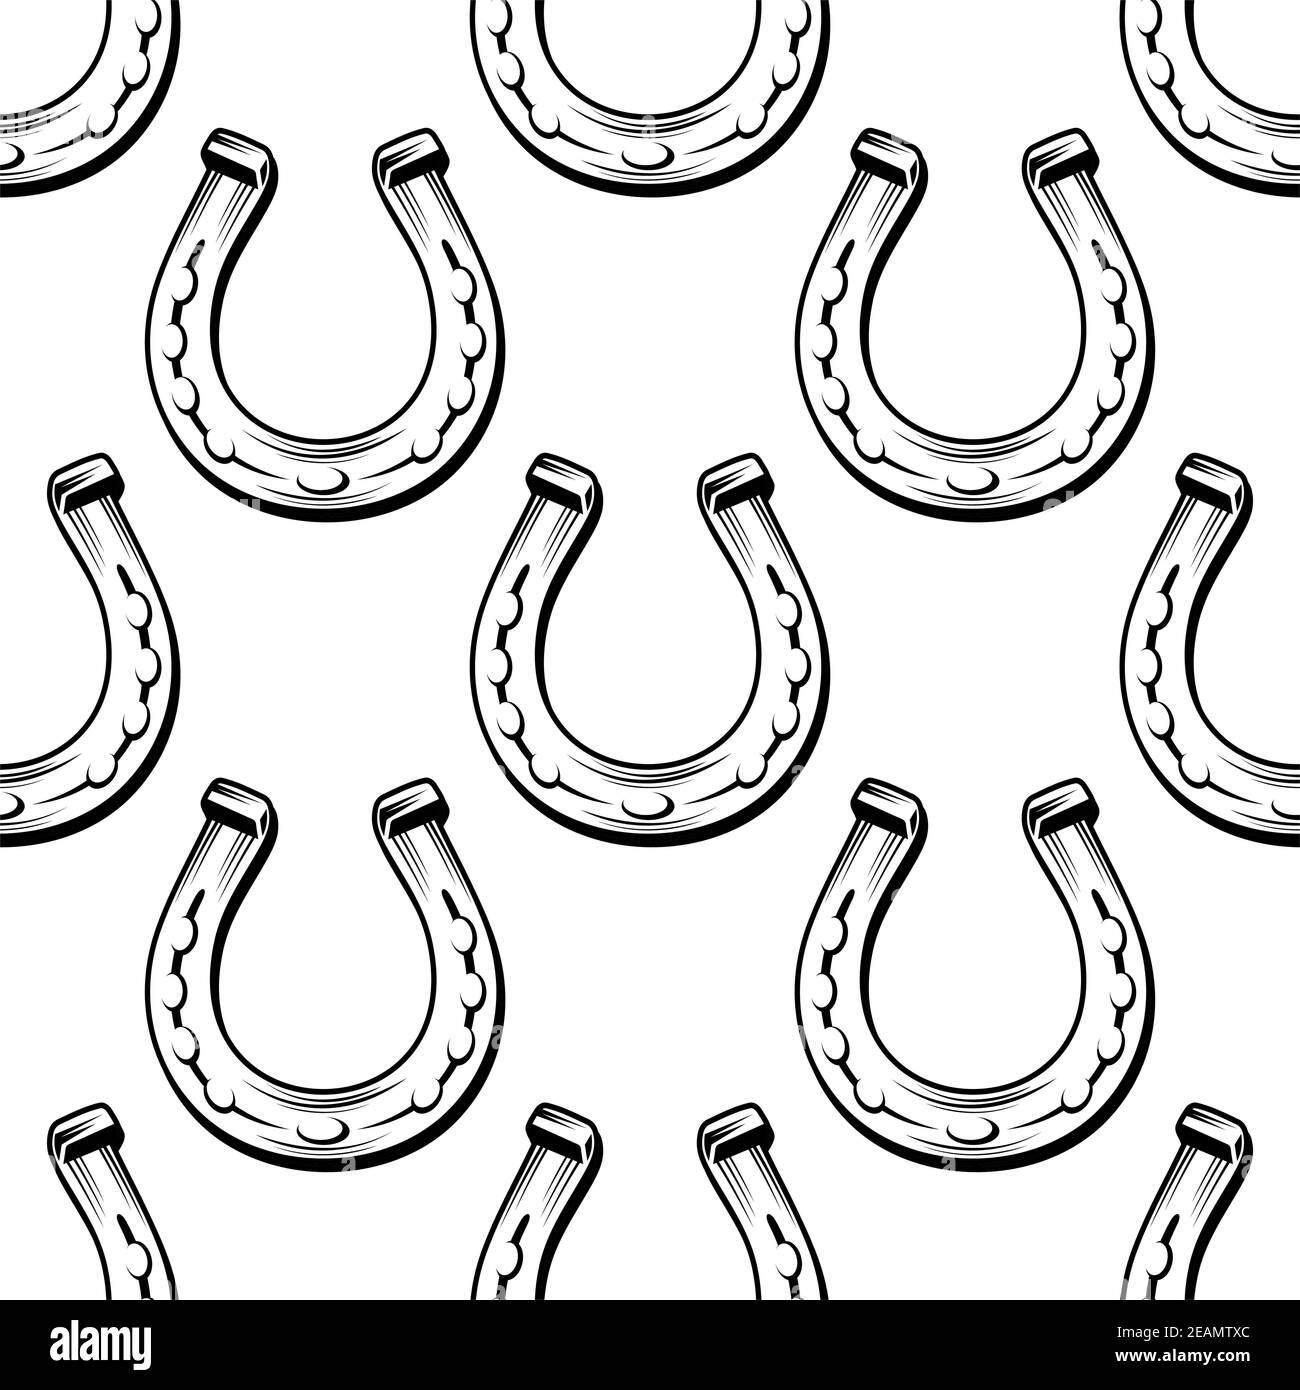 Seamless background black and white pattern of lucky horseshoes in square format for luck concept design Stock Vector